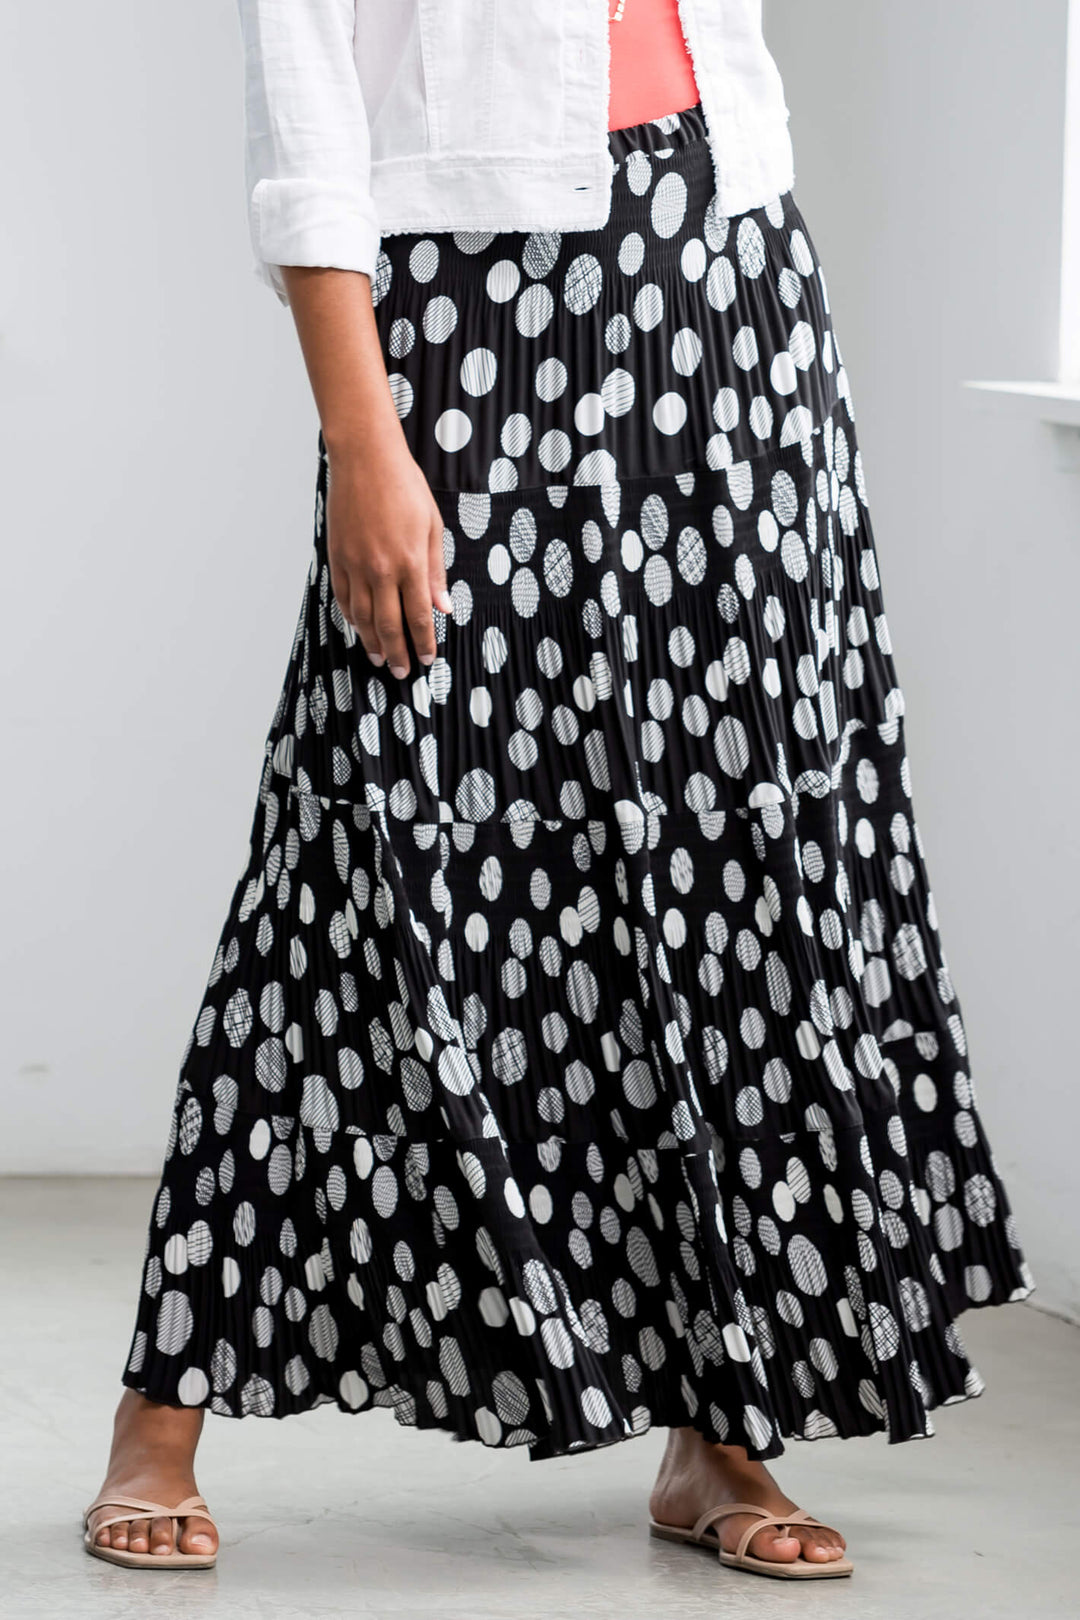 Alison Sheri A41142 Black & White Spot Pleated Skirt - Experience Boutique